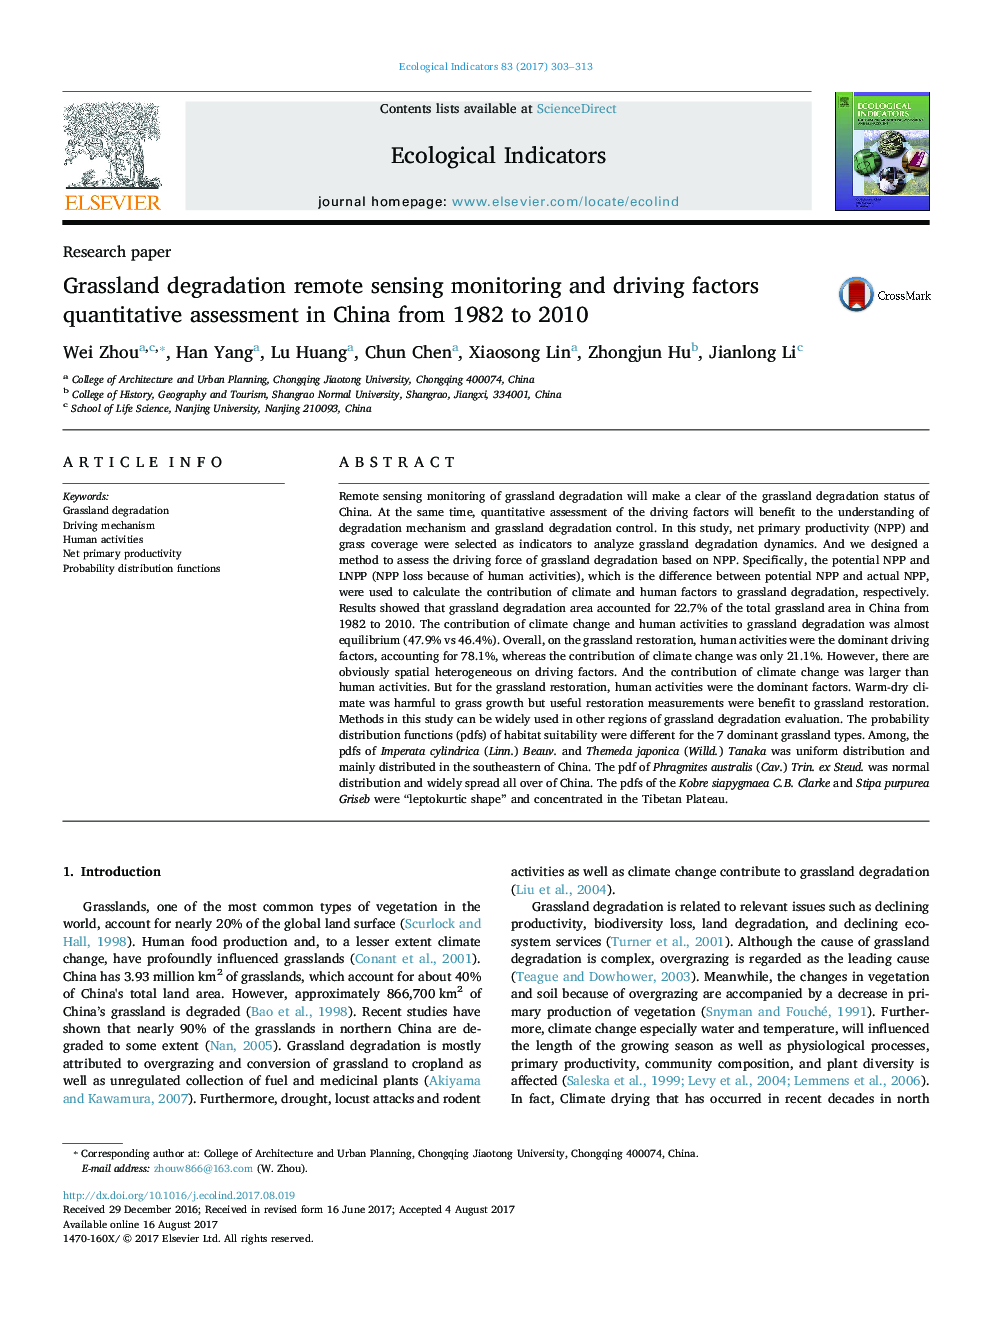 Research paperGrassland degradation remote sensing monitoring and driving factors quantitative assessment in China from 1982 to 2010